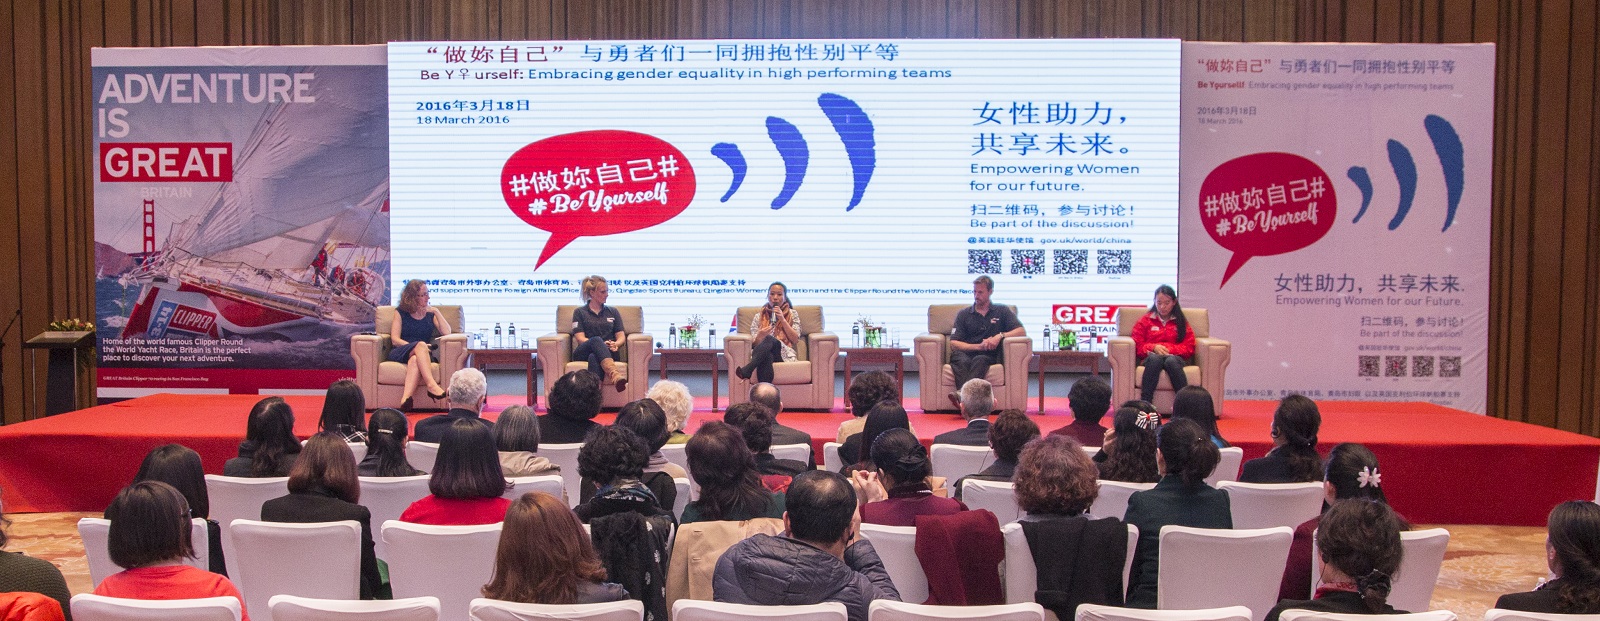 Panelists on stage at the GREAT Britain Be Yourself event in Qingdao 